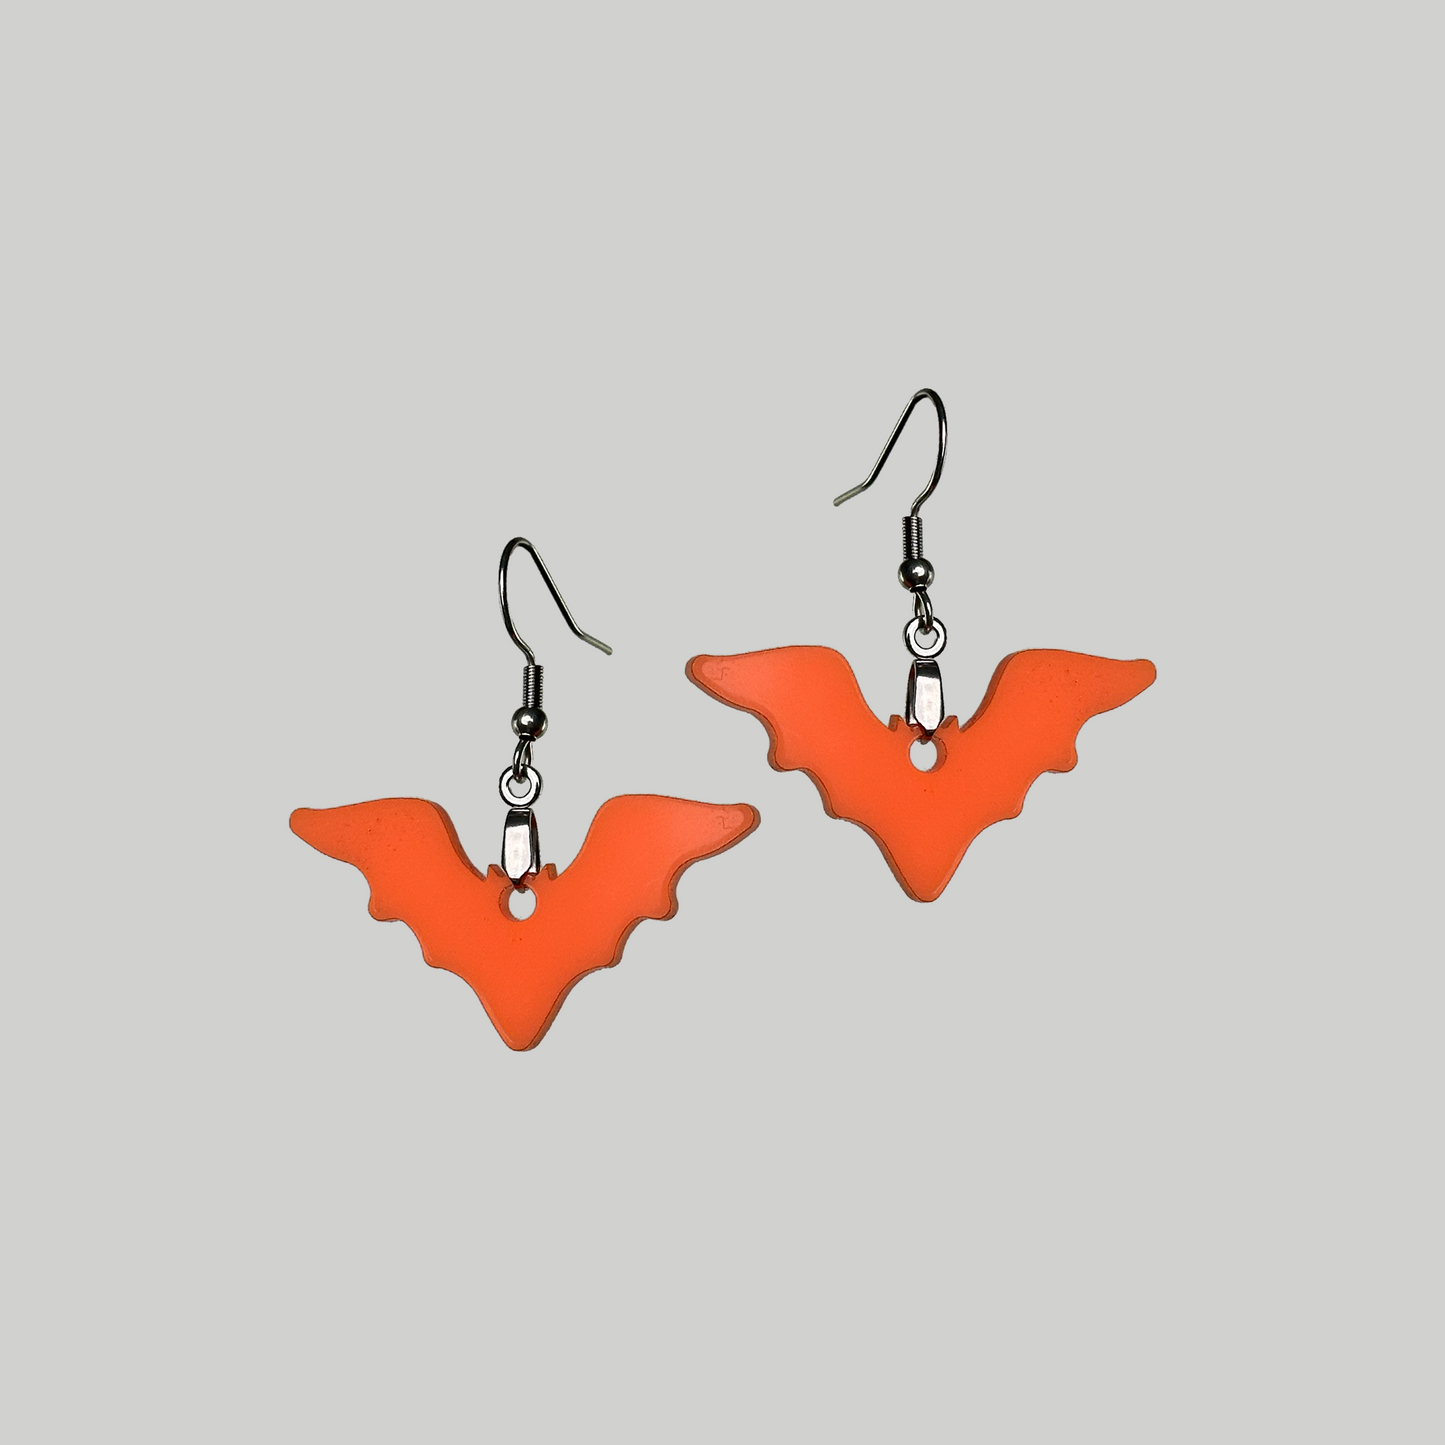 Bat Earrings: Stylish, these bat-shaped earrings bring a touch of nocturnal charm to your accessory collection.